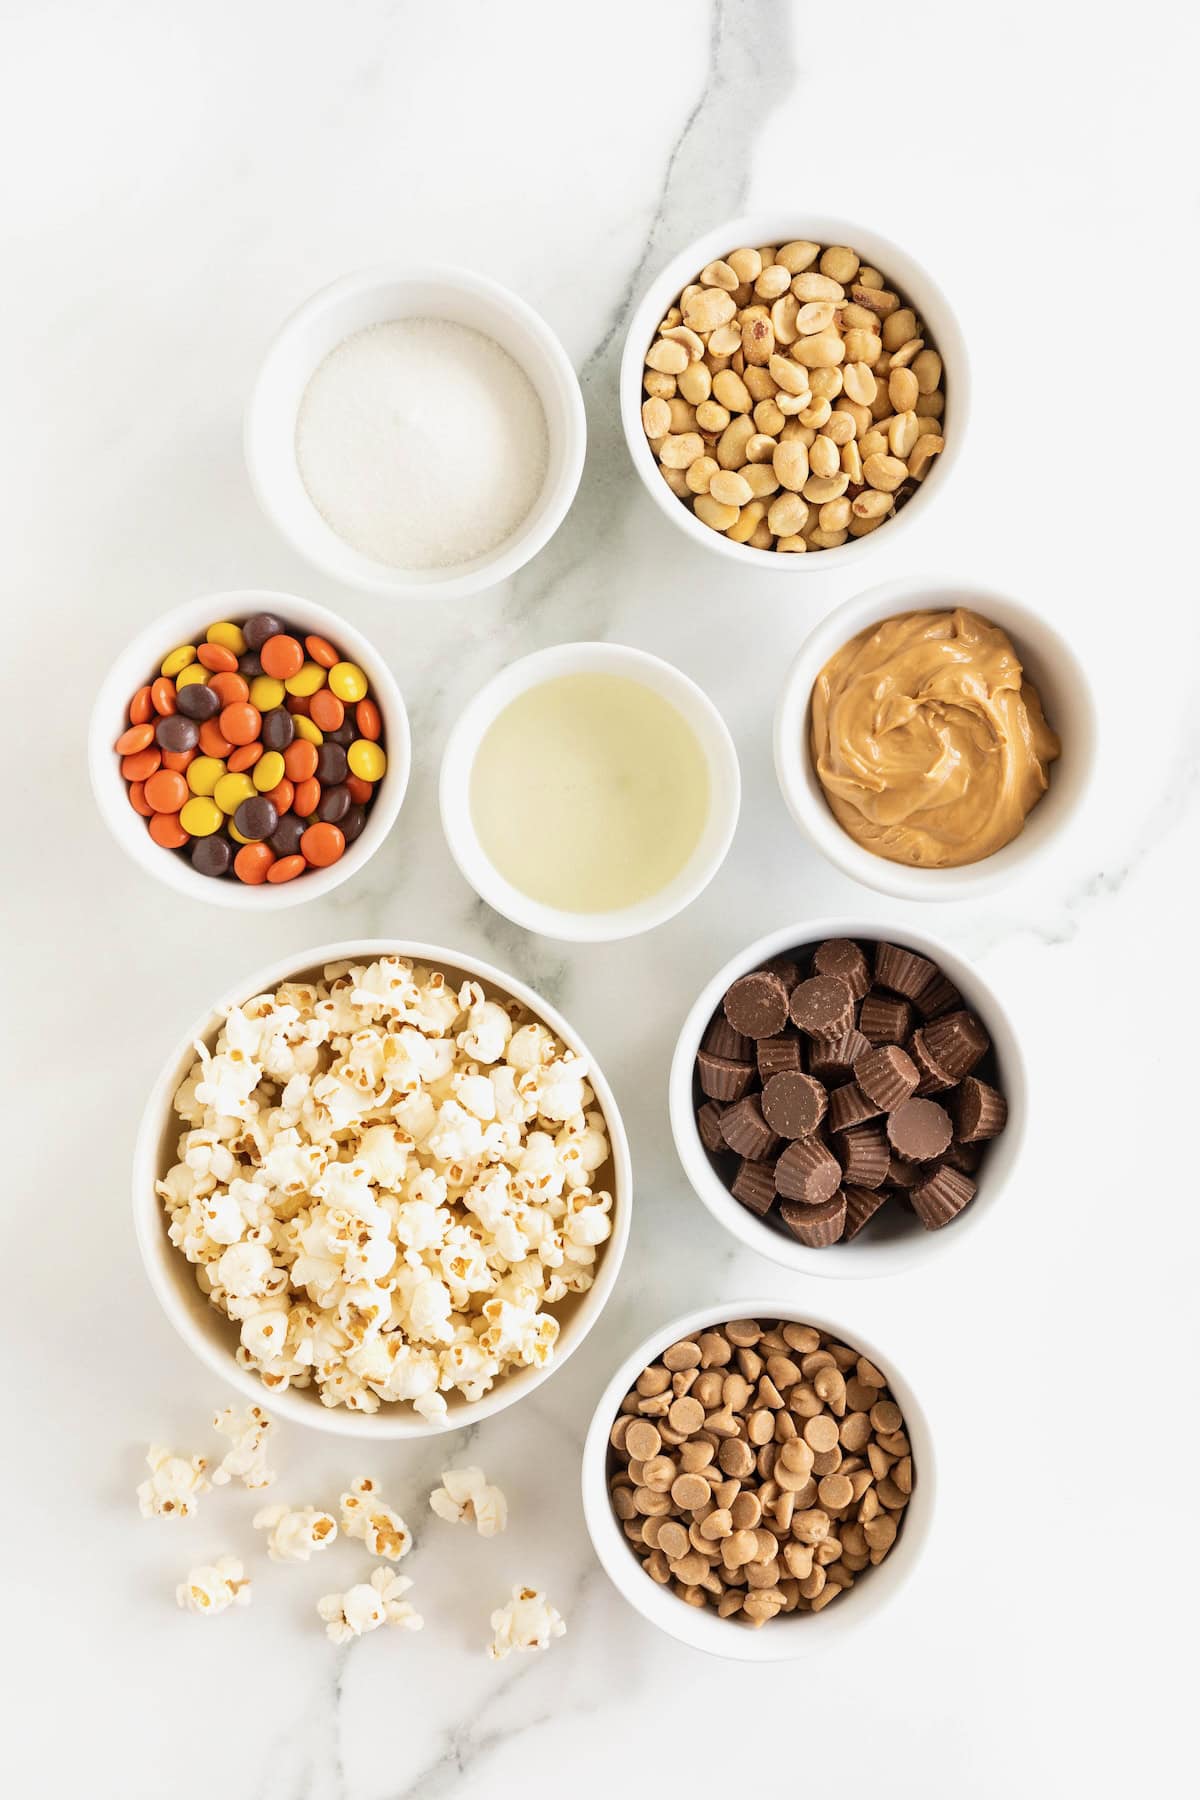 Ingredients for loaded peanut butter popcorn balls in small glass dishes a white marble counter.